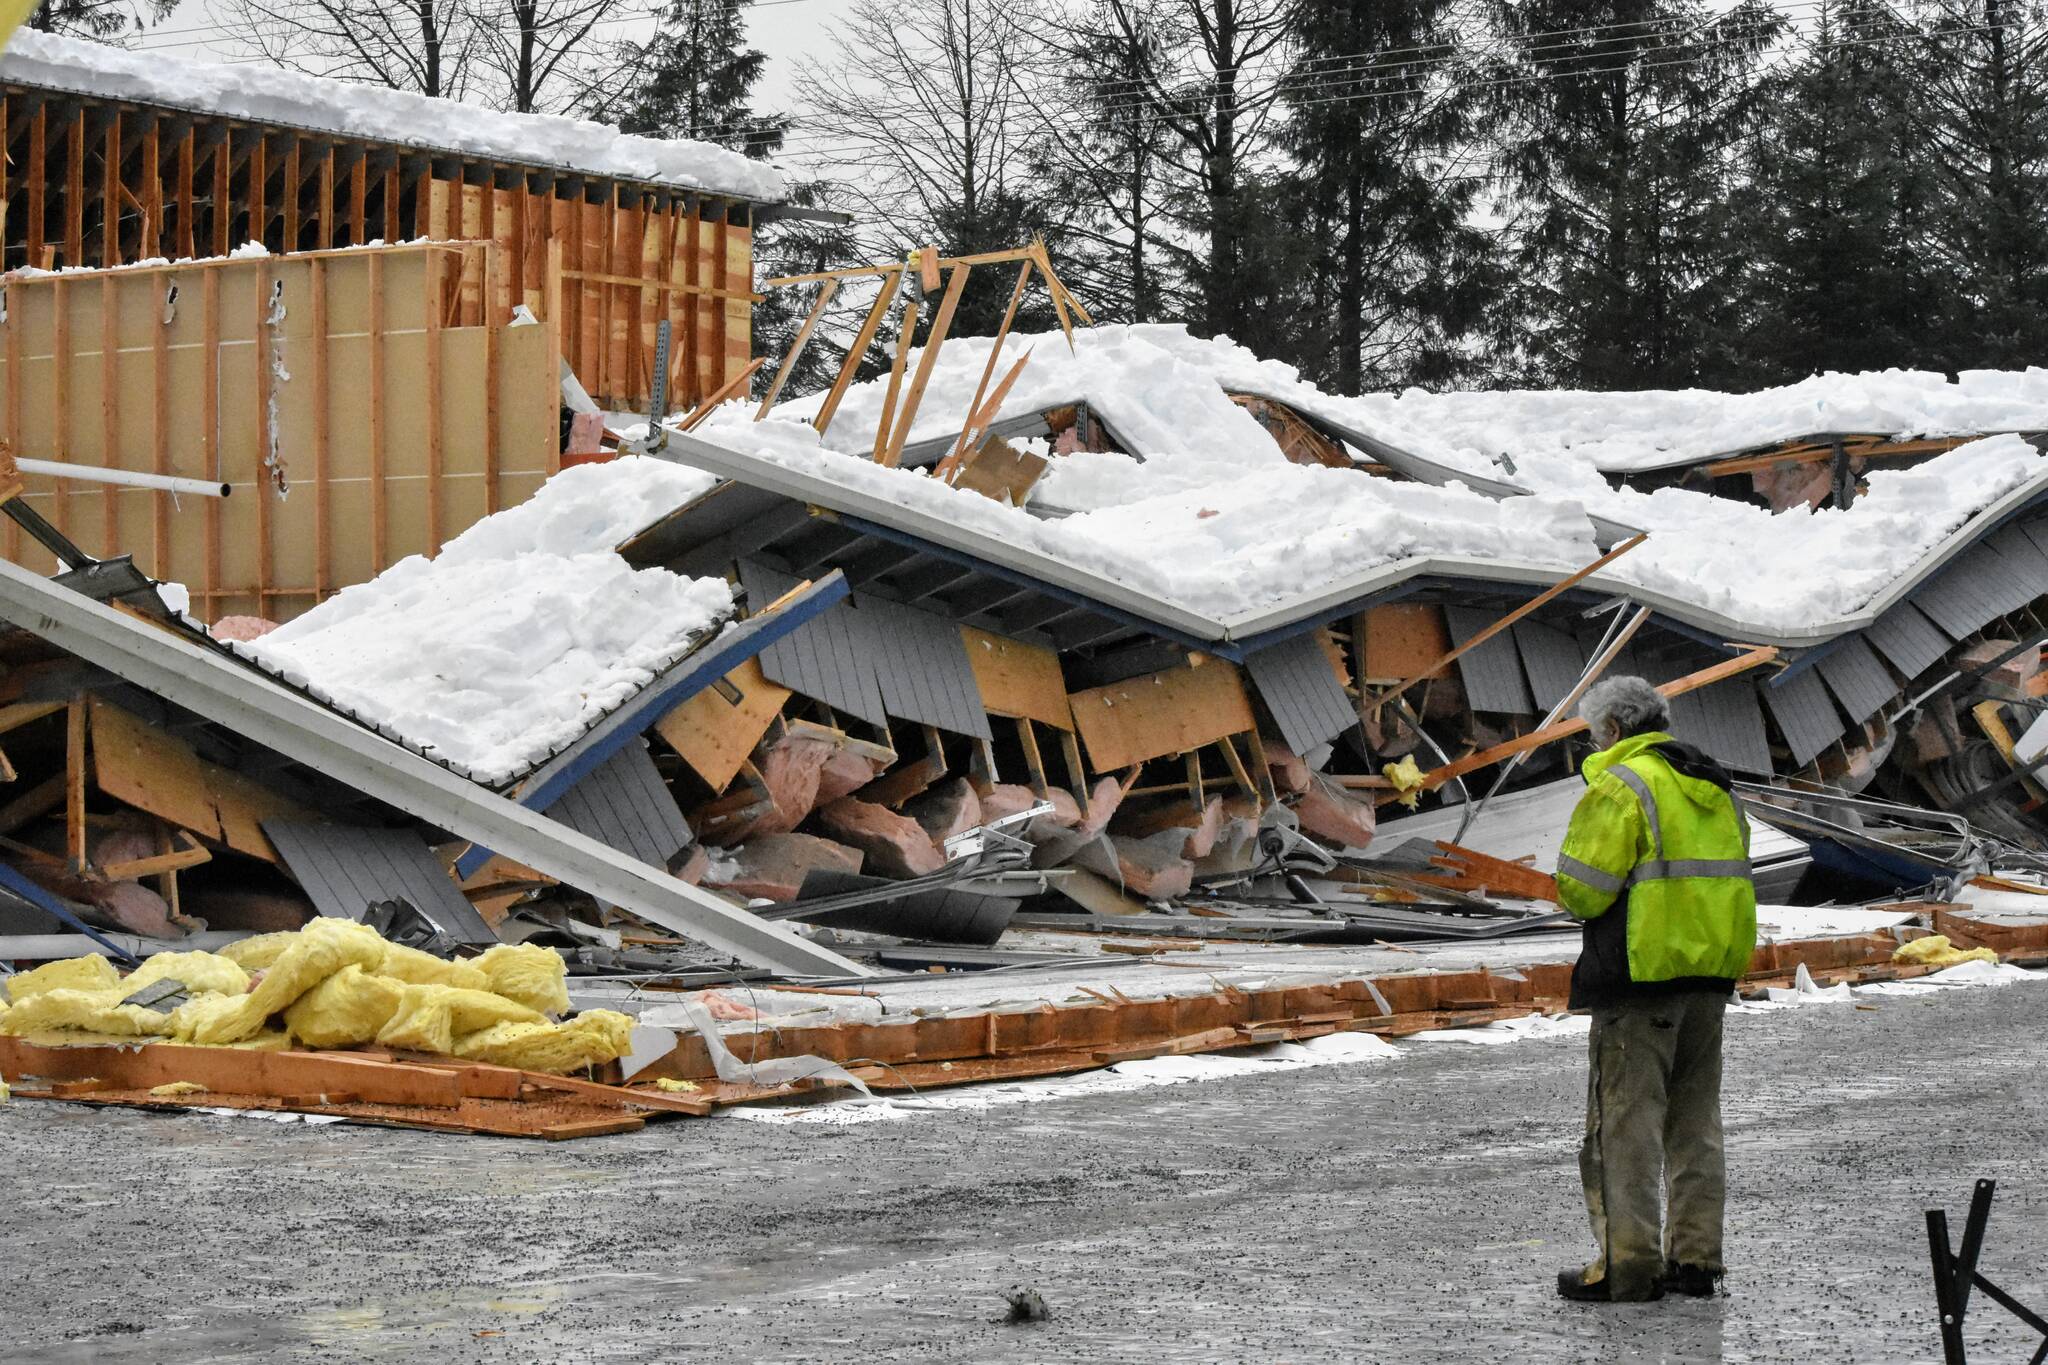 A worker stands outside a collapsed building in Lemon Creek on Tuesday, Jan. 11, 2022, one of two building collapses reported in Juneau amid ongoing rain following heavy snowfall. The City and Borough of Juneau said no injuries were reported and urged building owners to be cautious of snow loads on roofs. (Peter Segall / Juneau Empire)